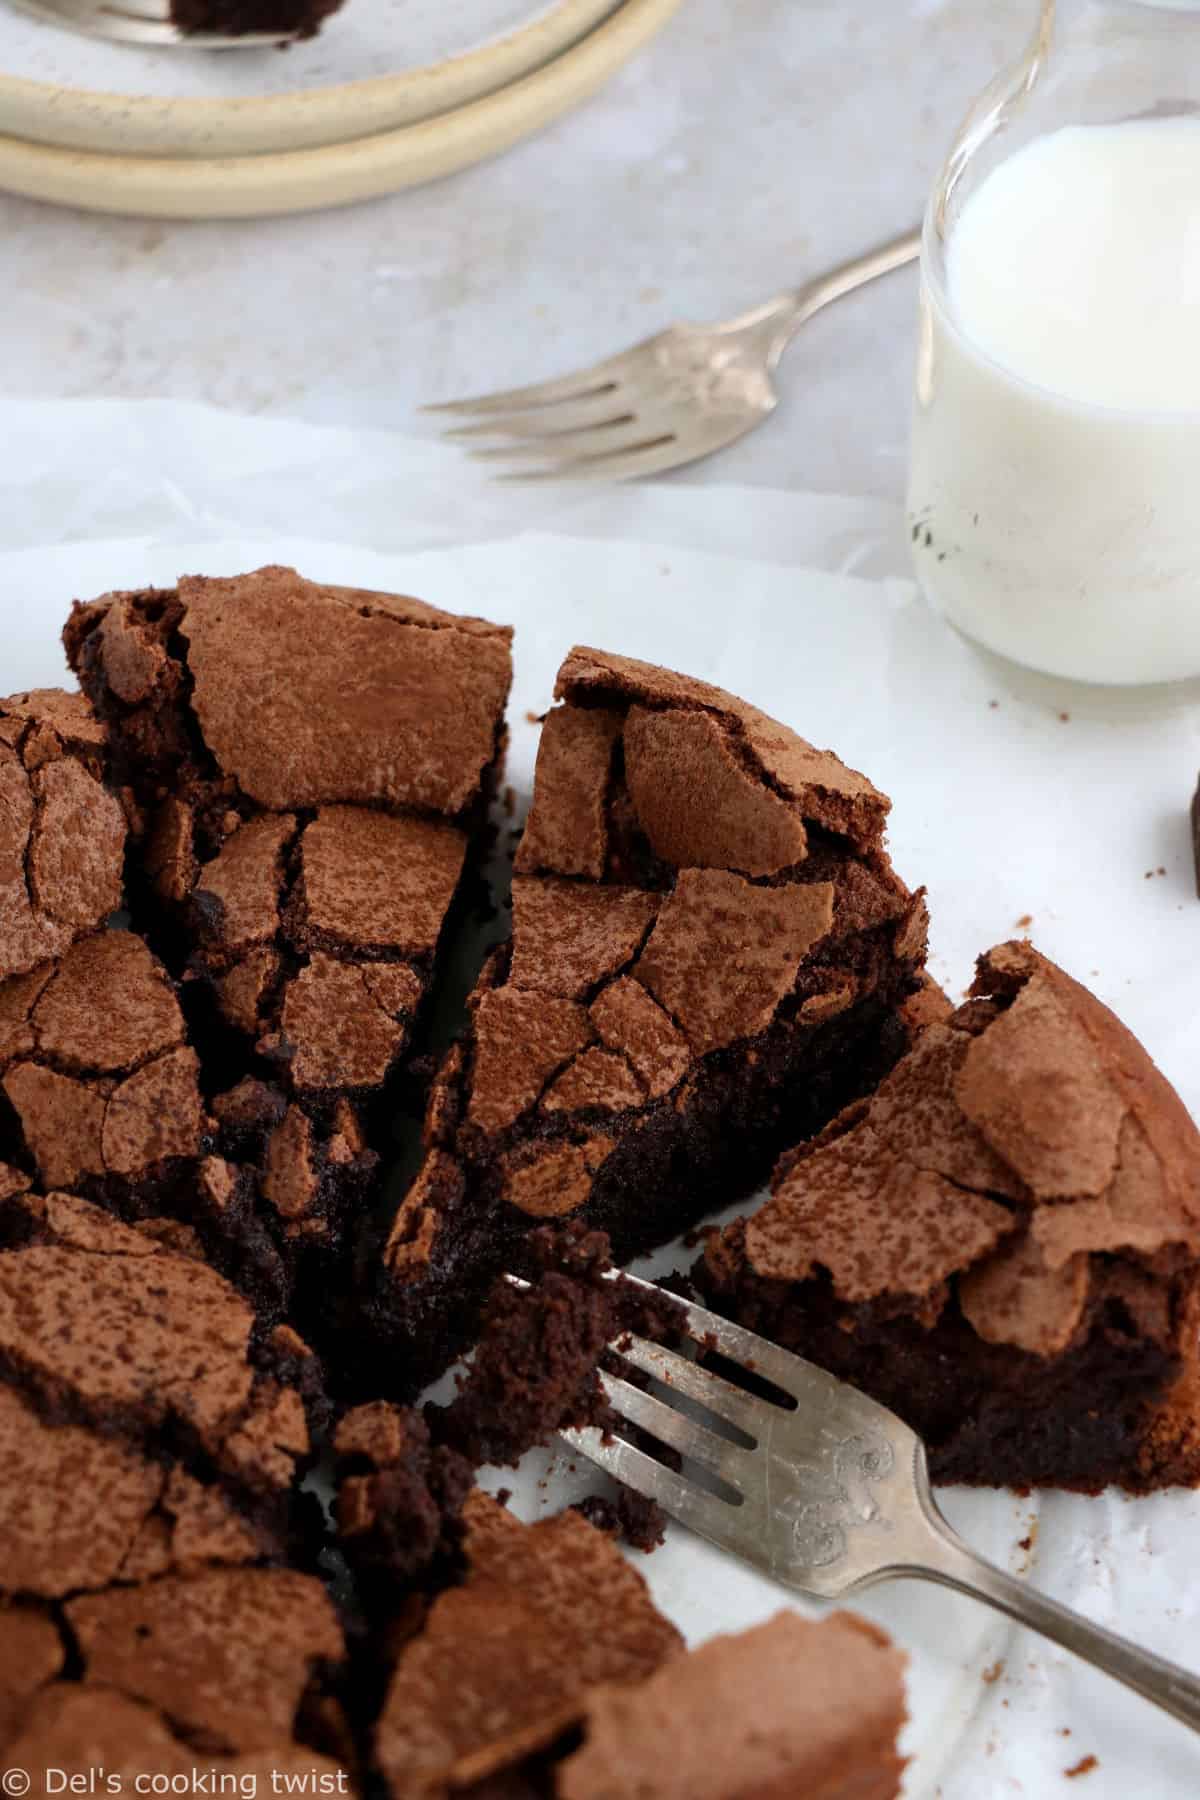 This is hands down the BEST flourless chocolate cake ever! Rich, chocolatey, with a light and fluffy texture and an irresistible crackly topping, it is an absolute chocolate lover's dream and might just become your favorite chocolate cake.